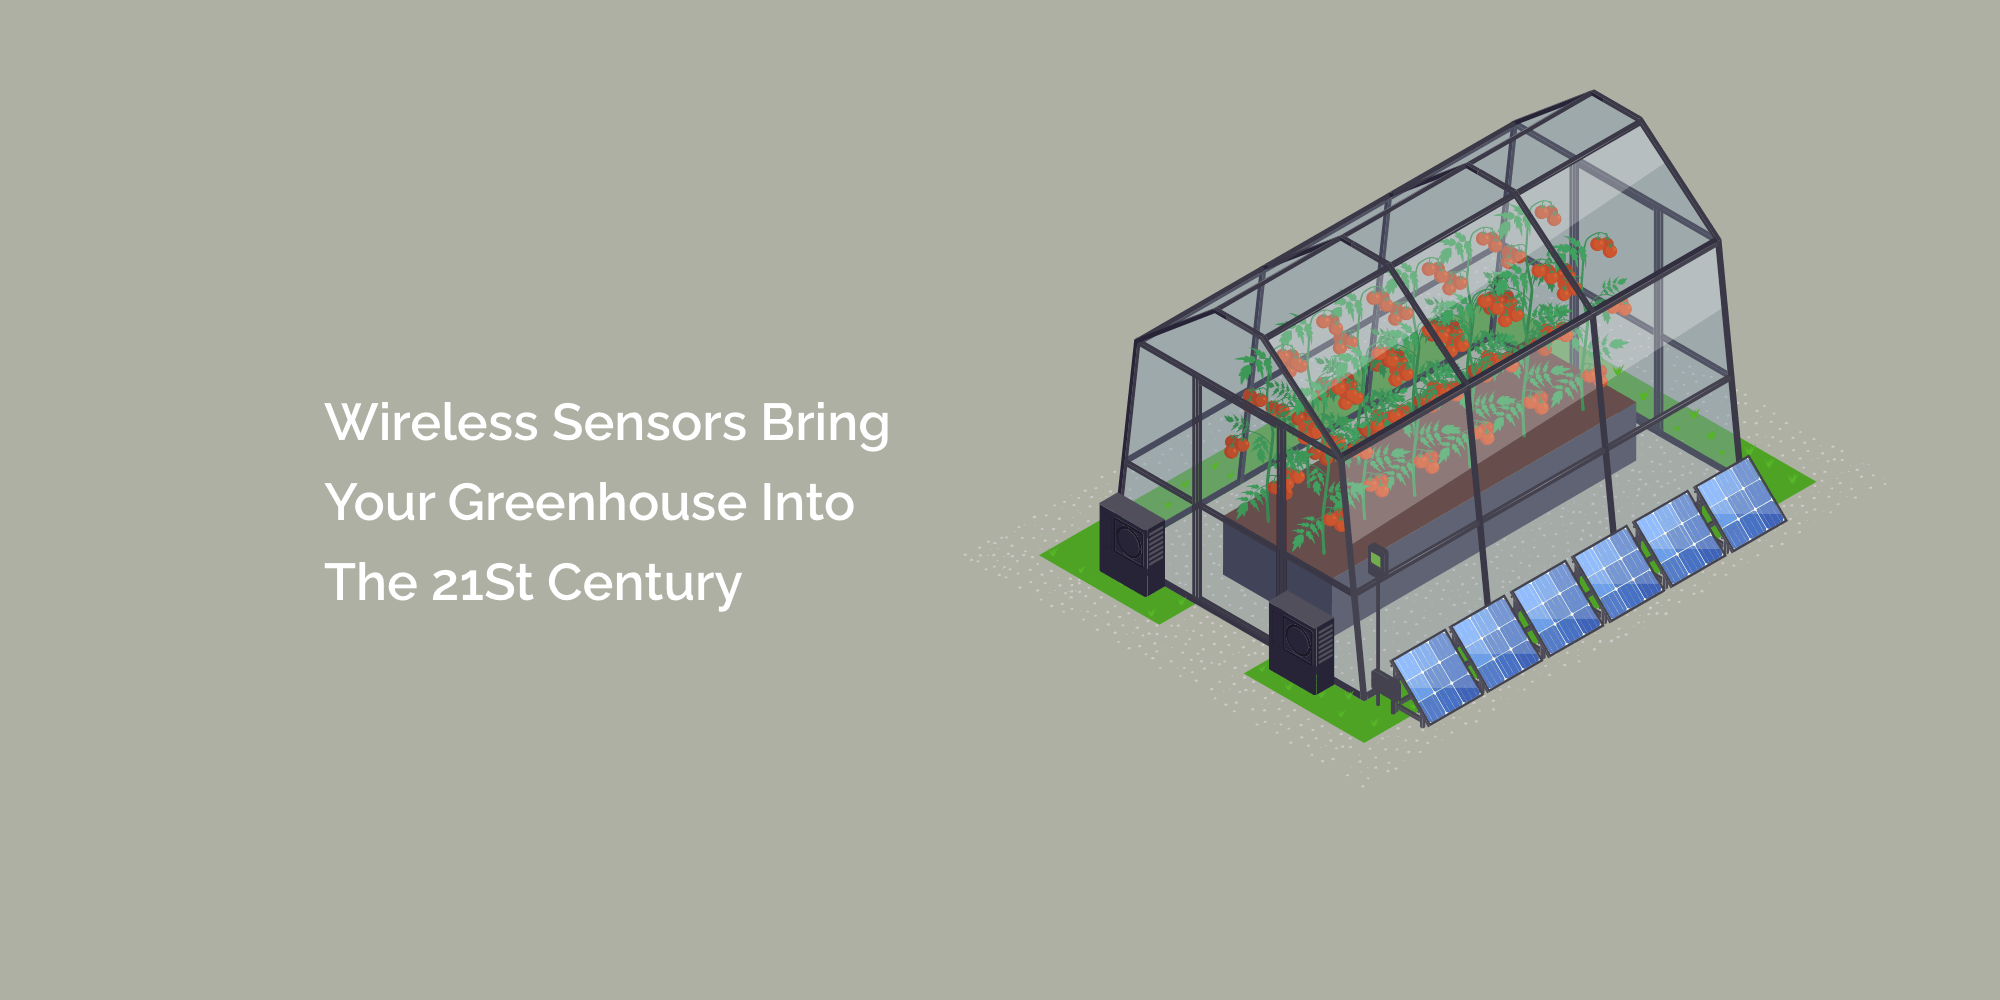 Wireless Sensors Bring Your Greenhouse Into the 21st Century